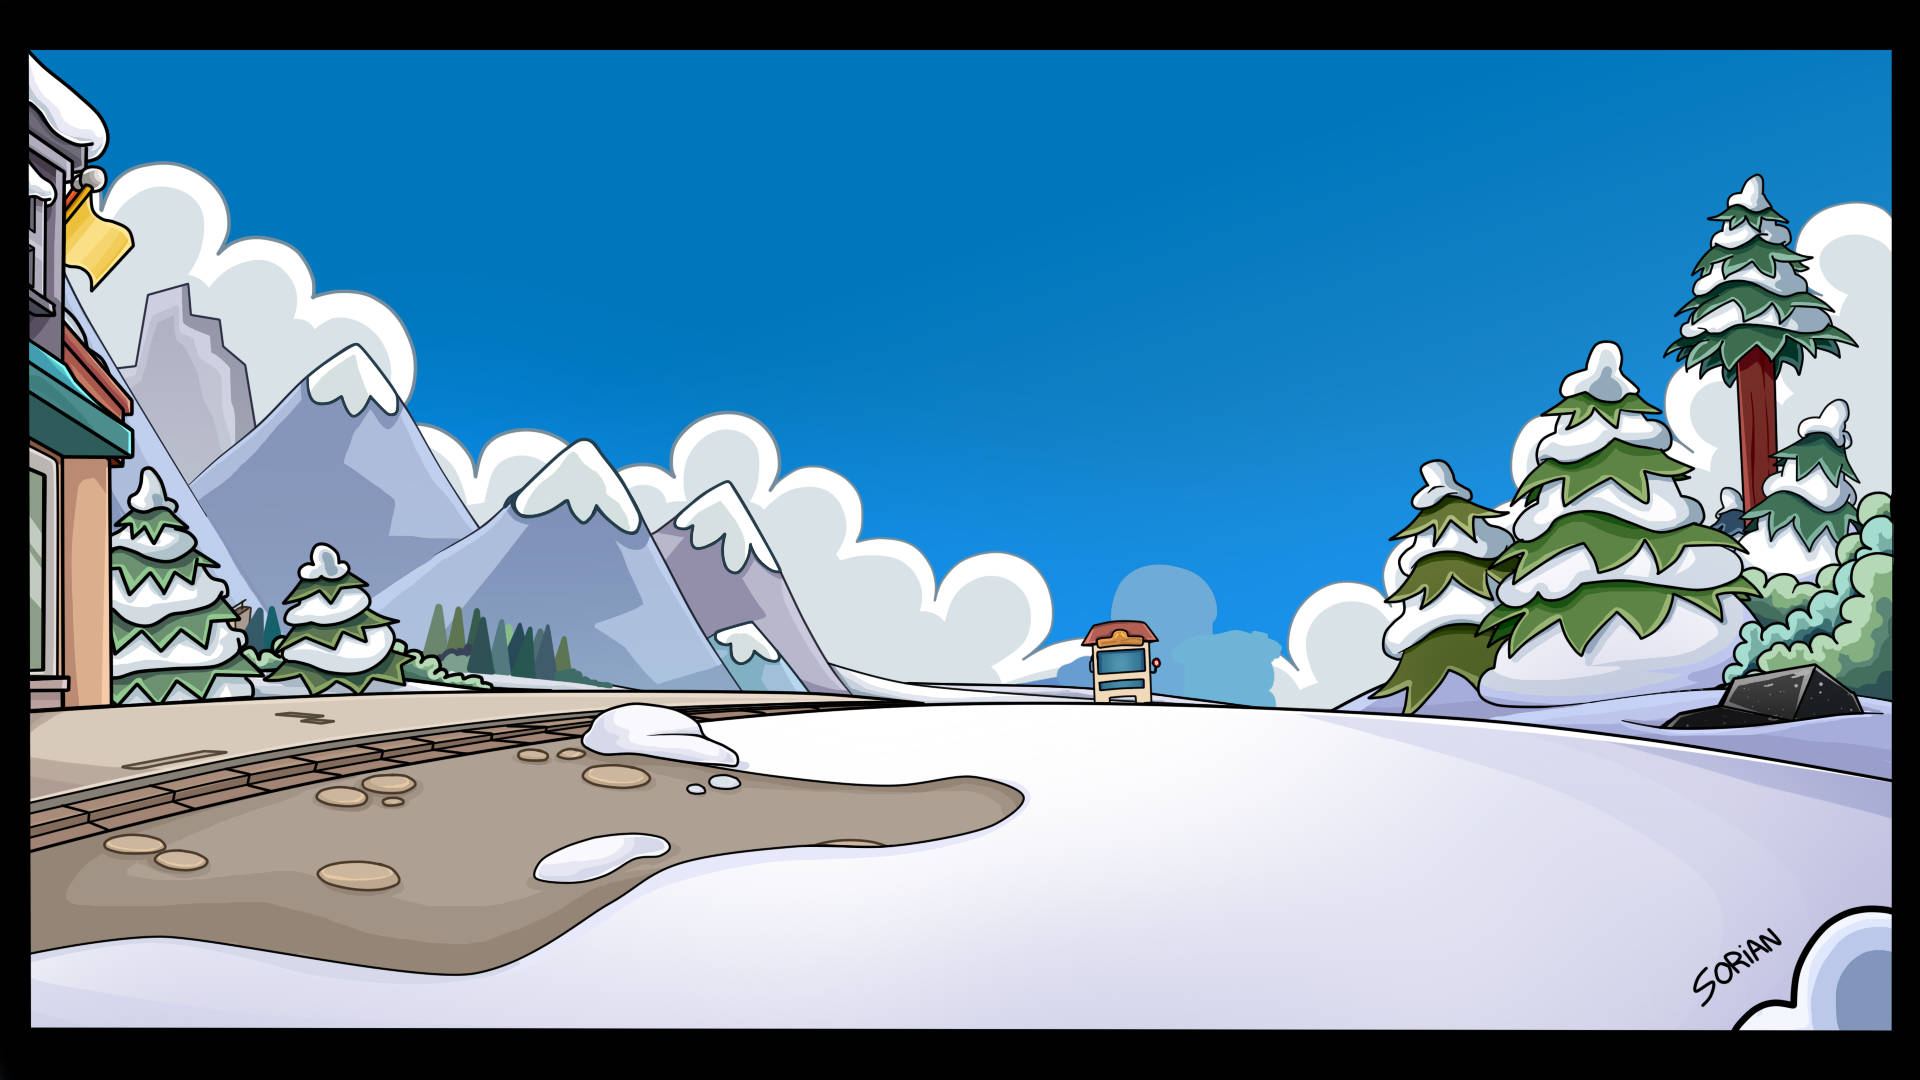 Club Penguin In Winter Environment Background